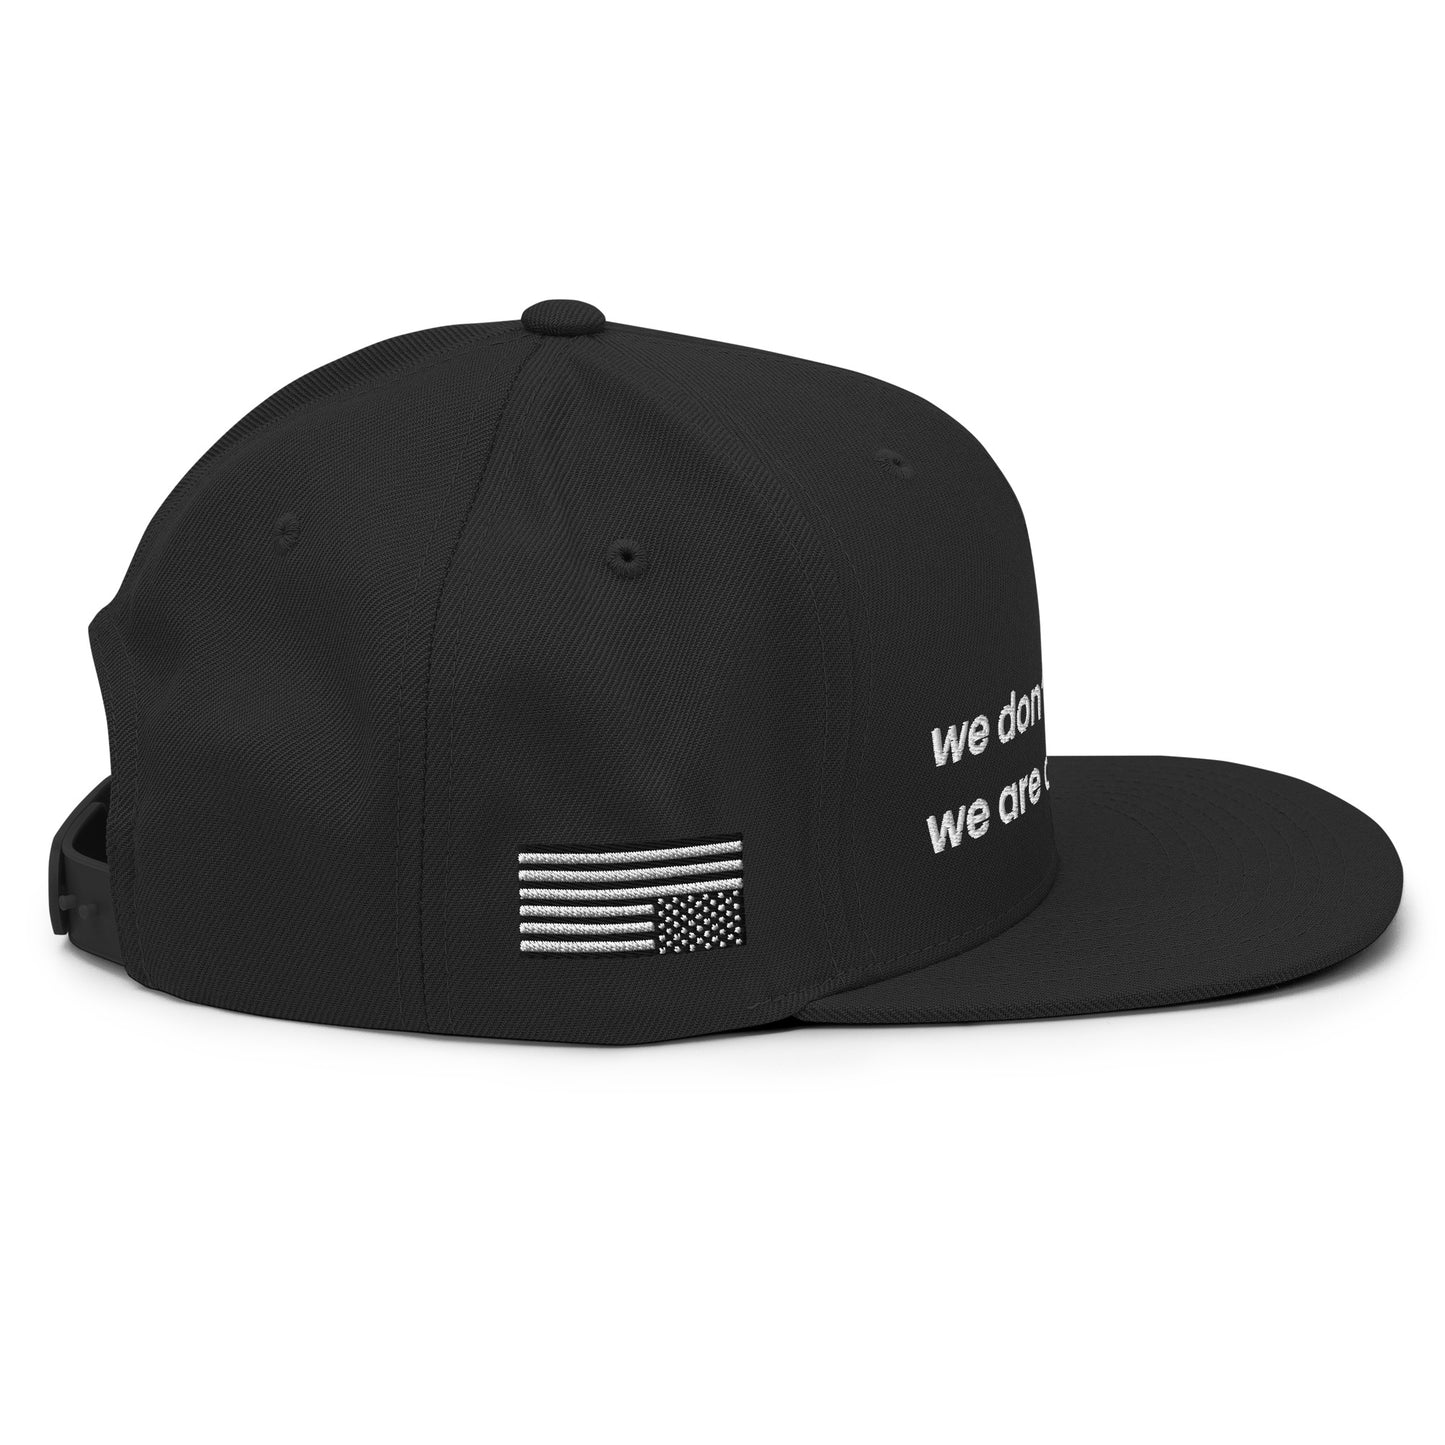 Hats - WE ARE A MOVEMENT(snapback)